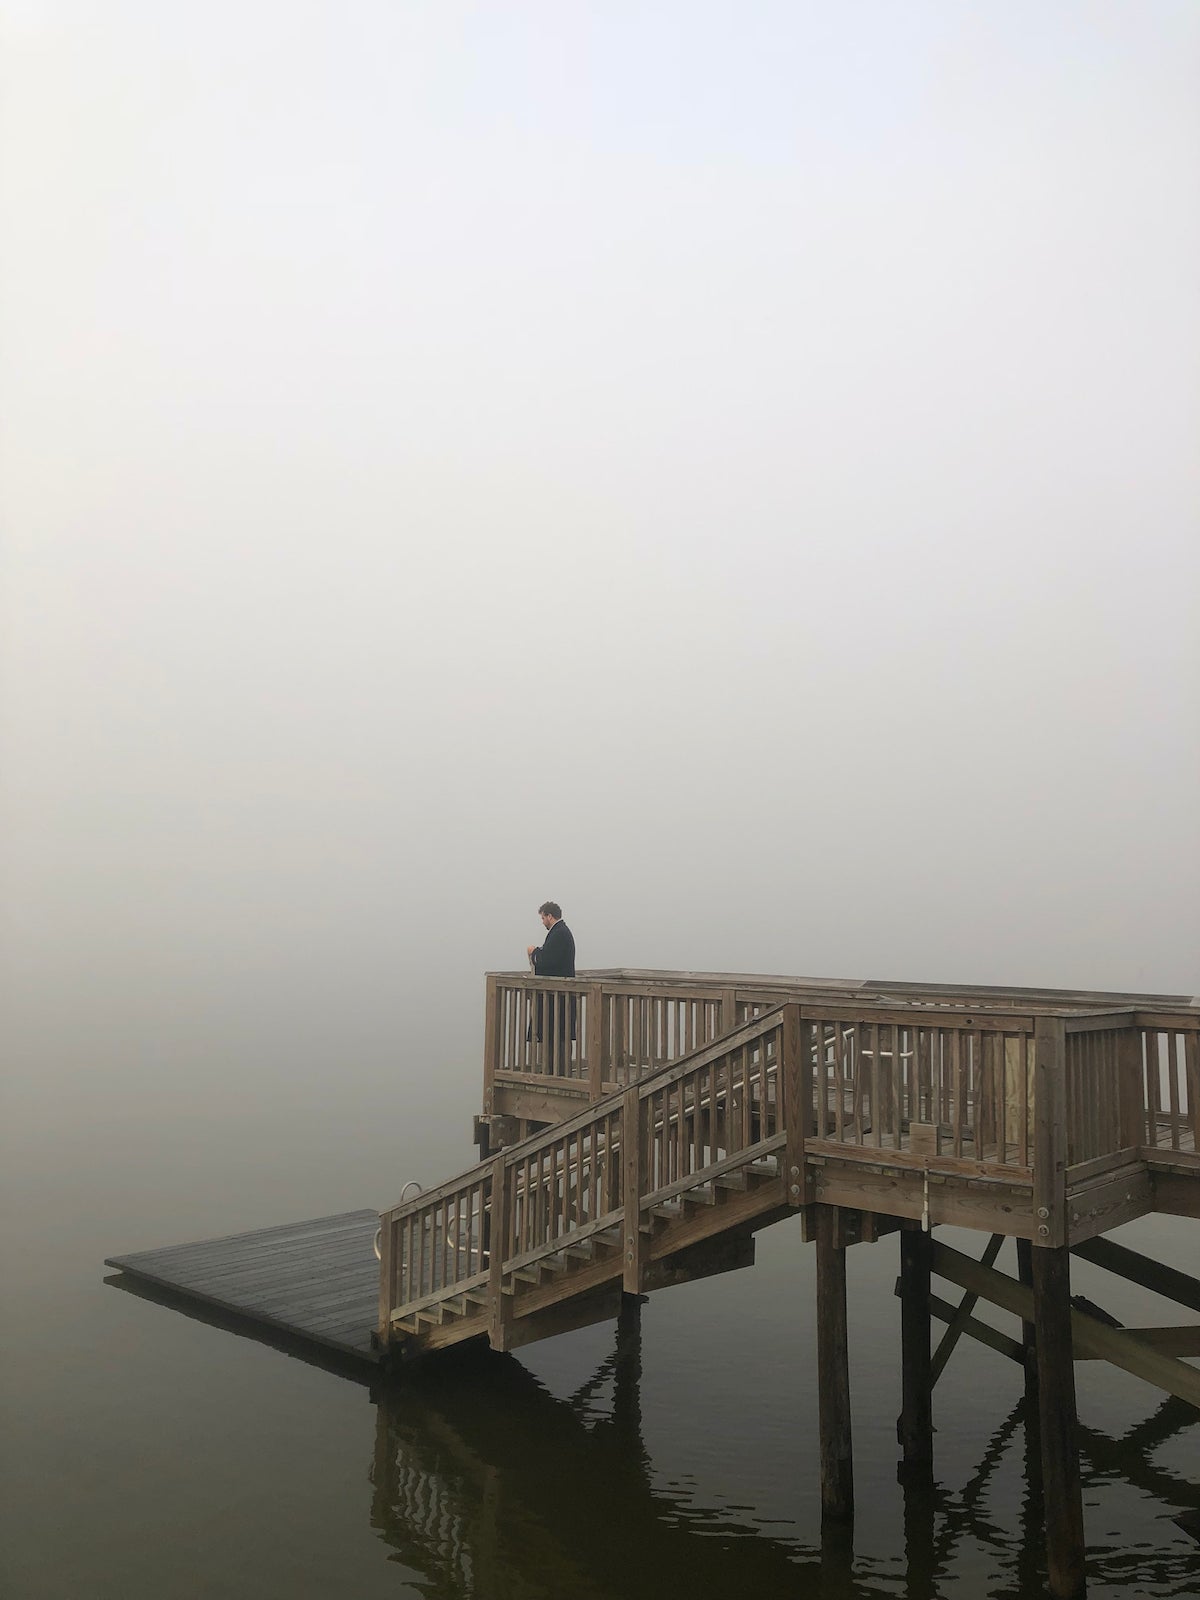 A dock in the water with a wooden walkway with a man staring over the edge in to the beyond